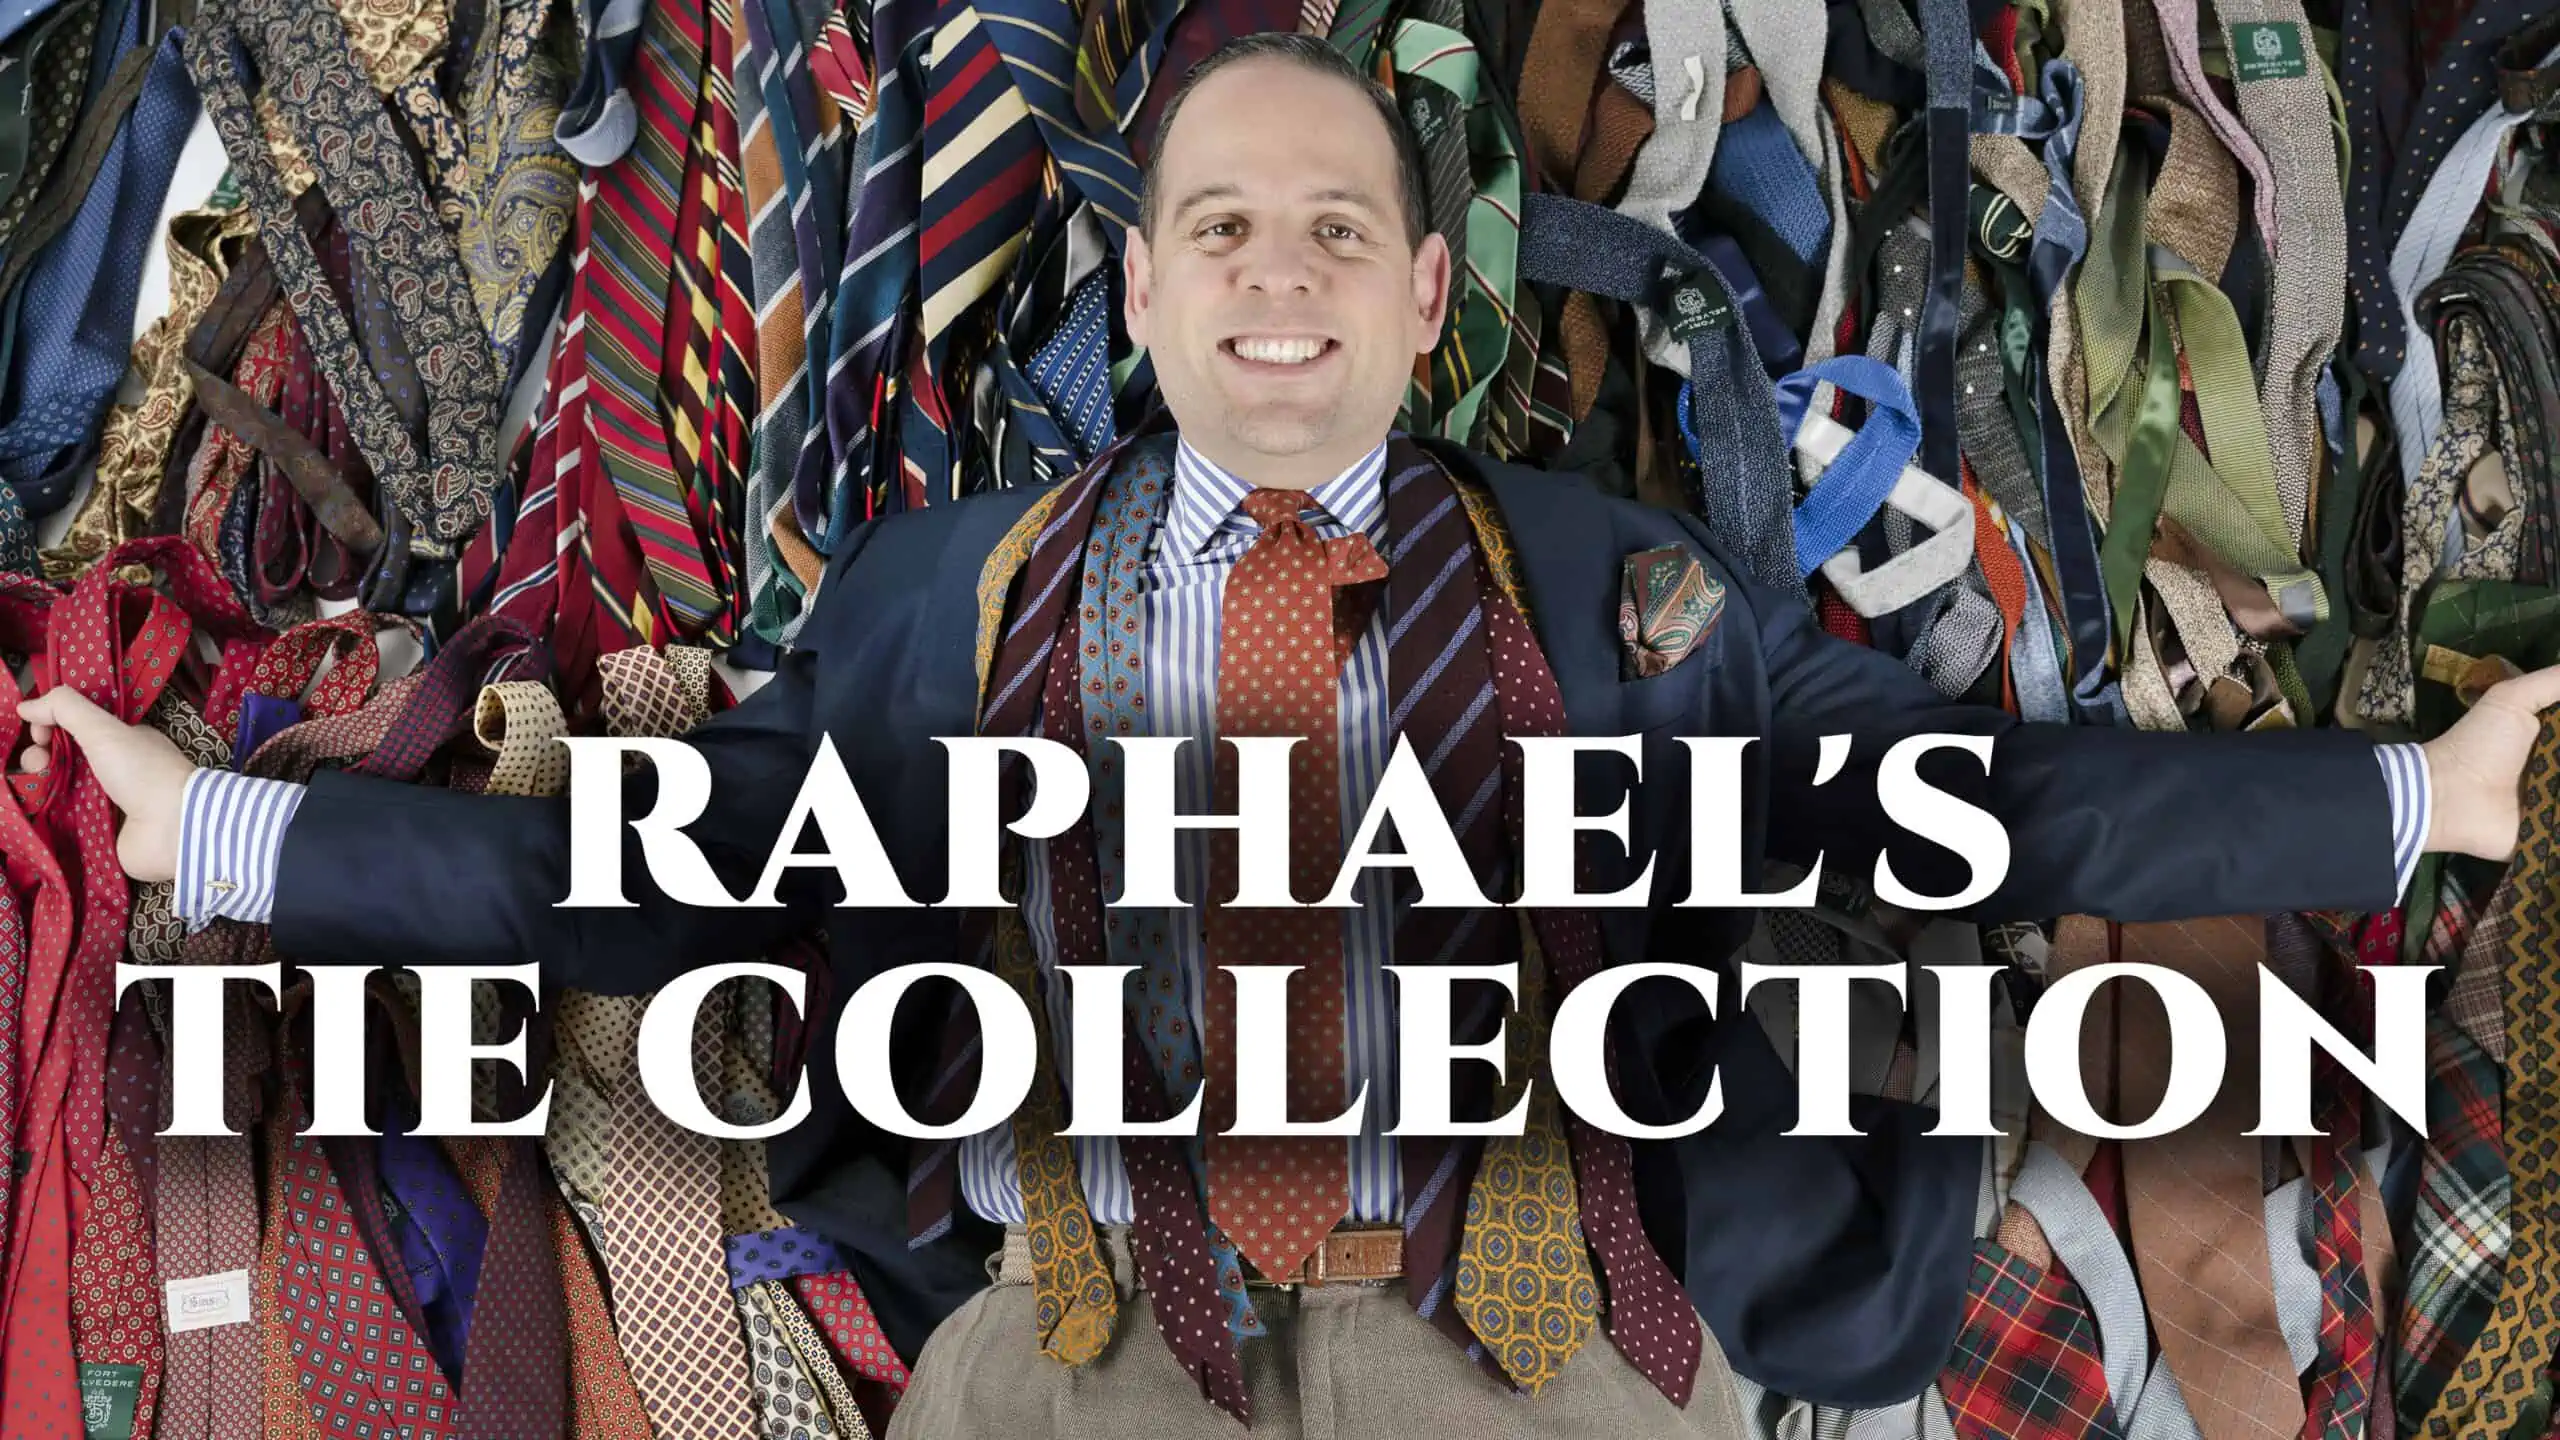 Raphaels Tie Collection 3840x2160 scaled